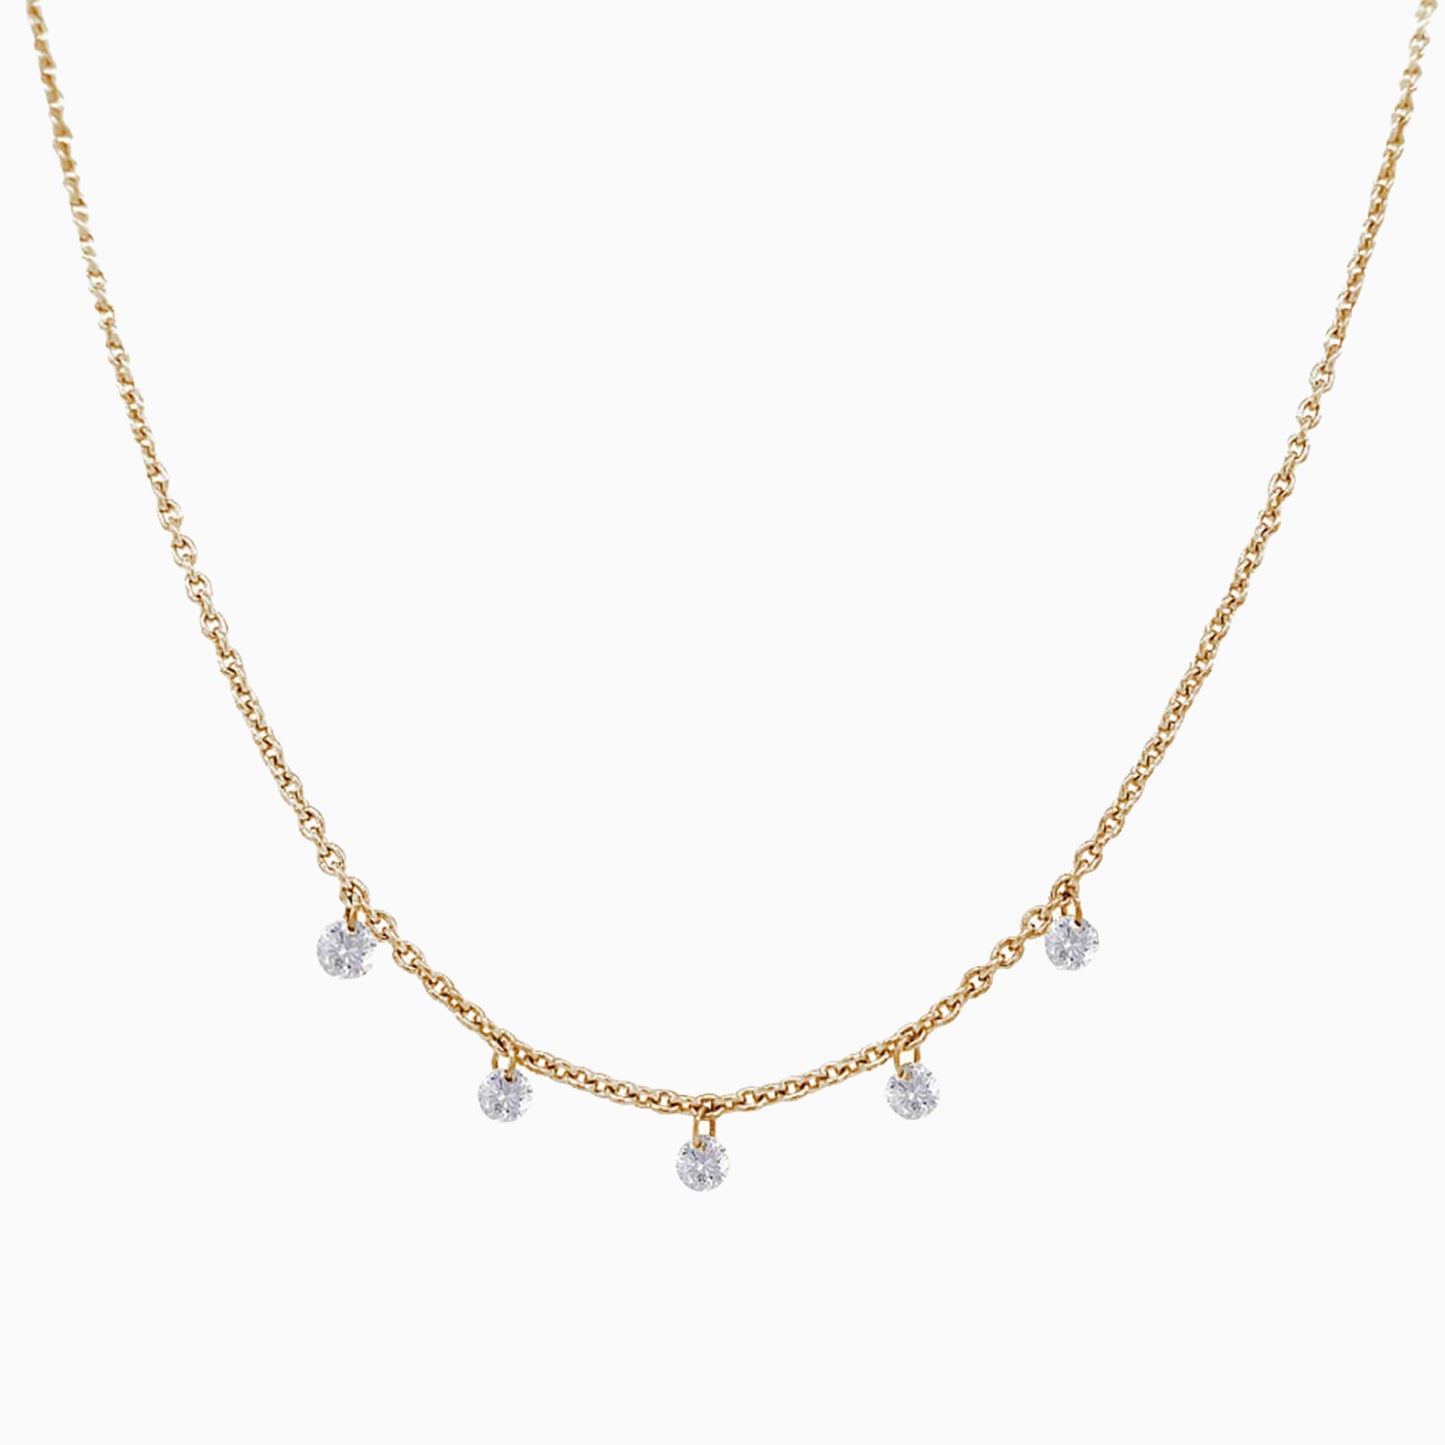 Floating Five Diamond Necklace in Yellow Gold on a white background